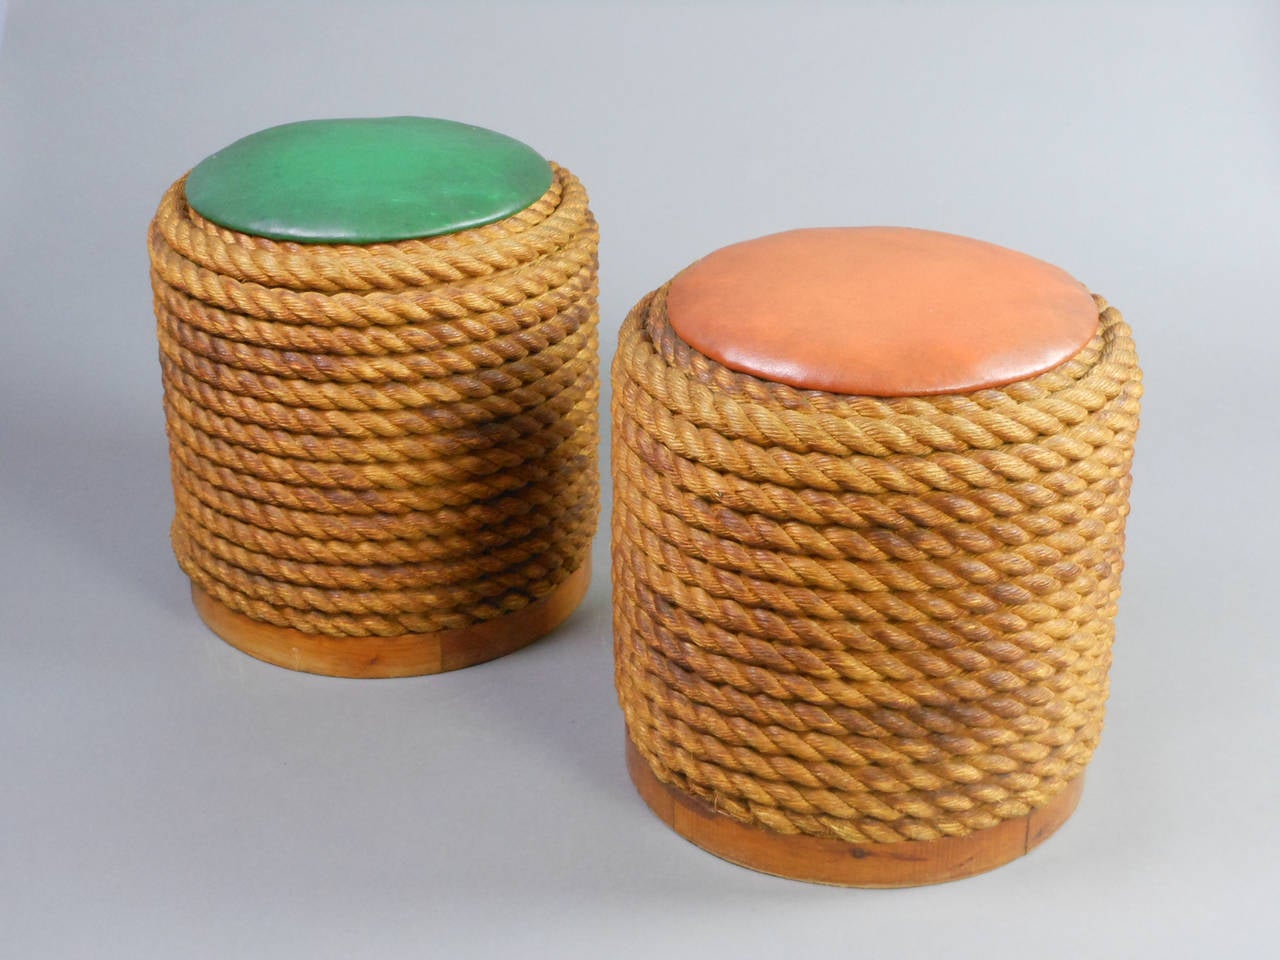 Each of cylinder form composed of coiled rope with vinyl seat covers.